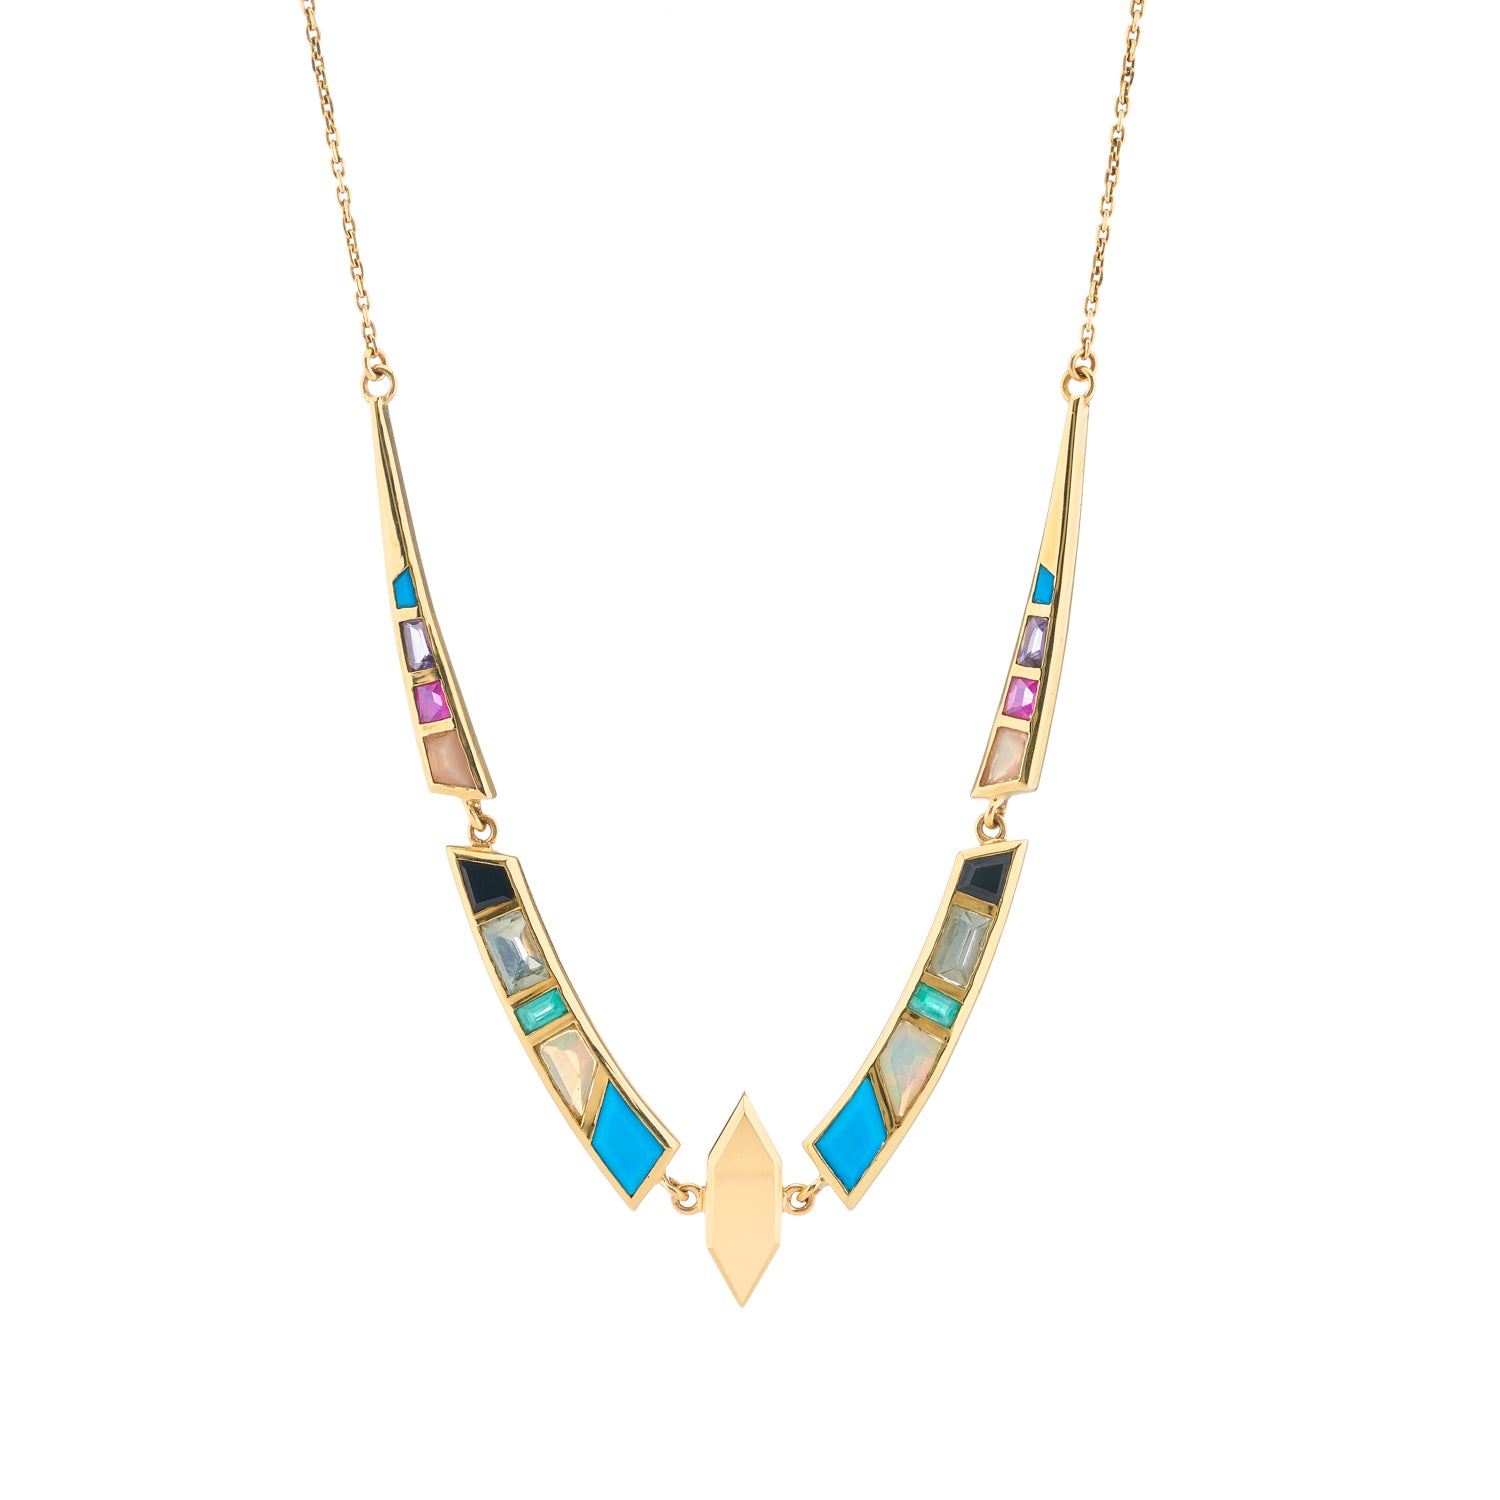 Metier by Tomfoolery statement necklace